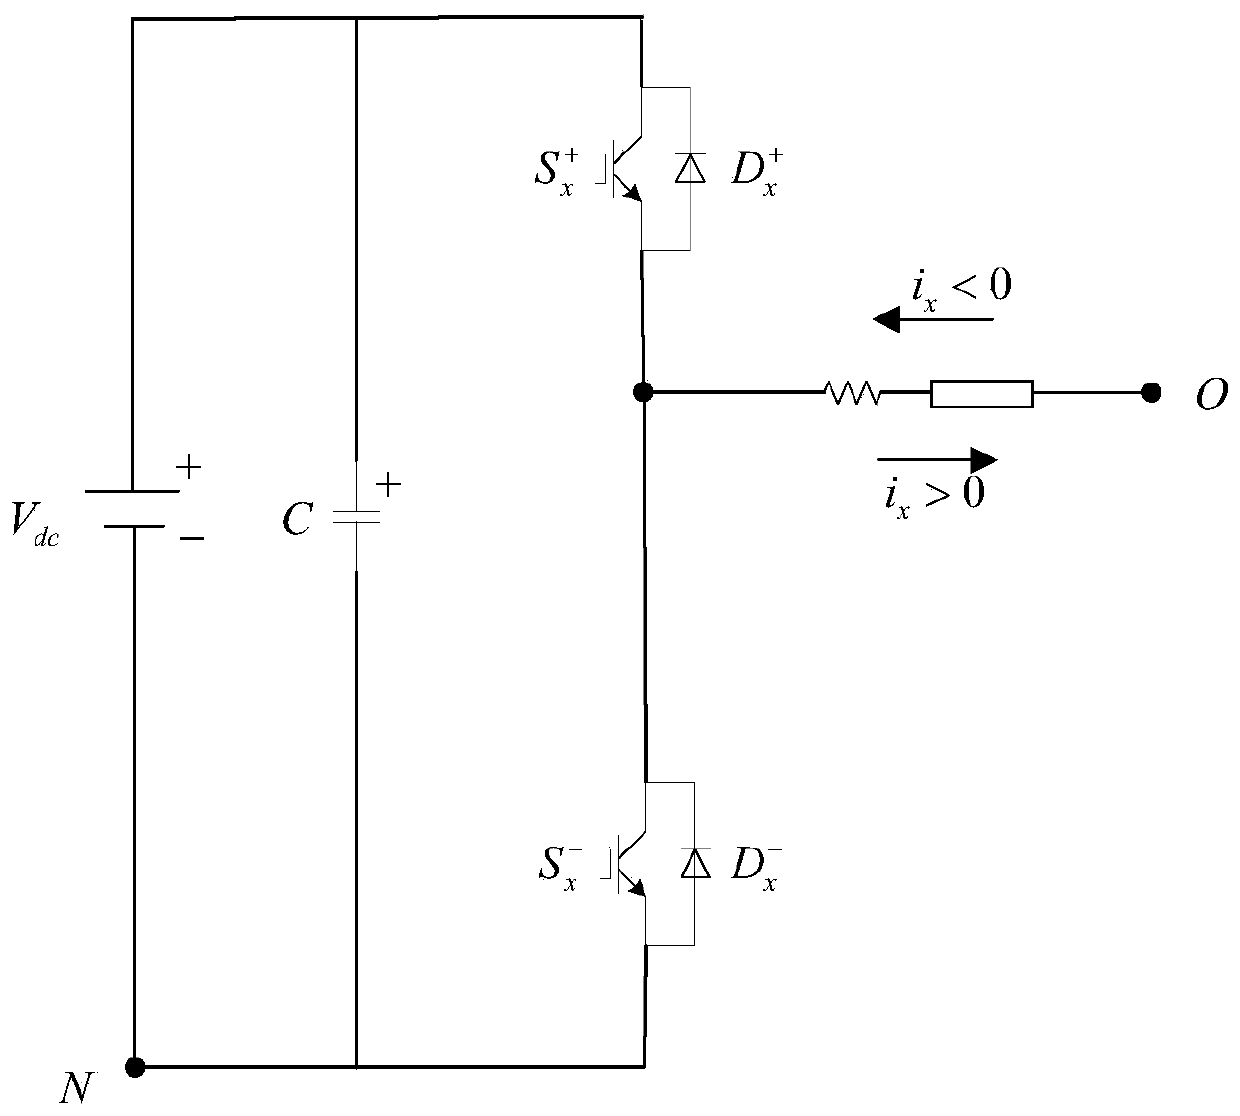 Online acquisition method for input active power and reactive power of induction motor